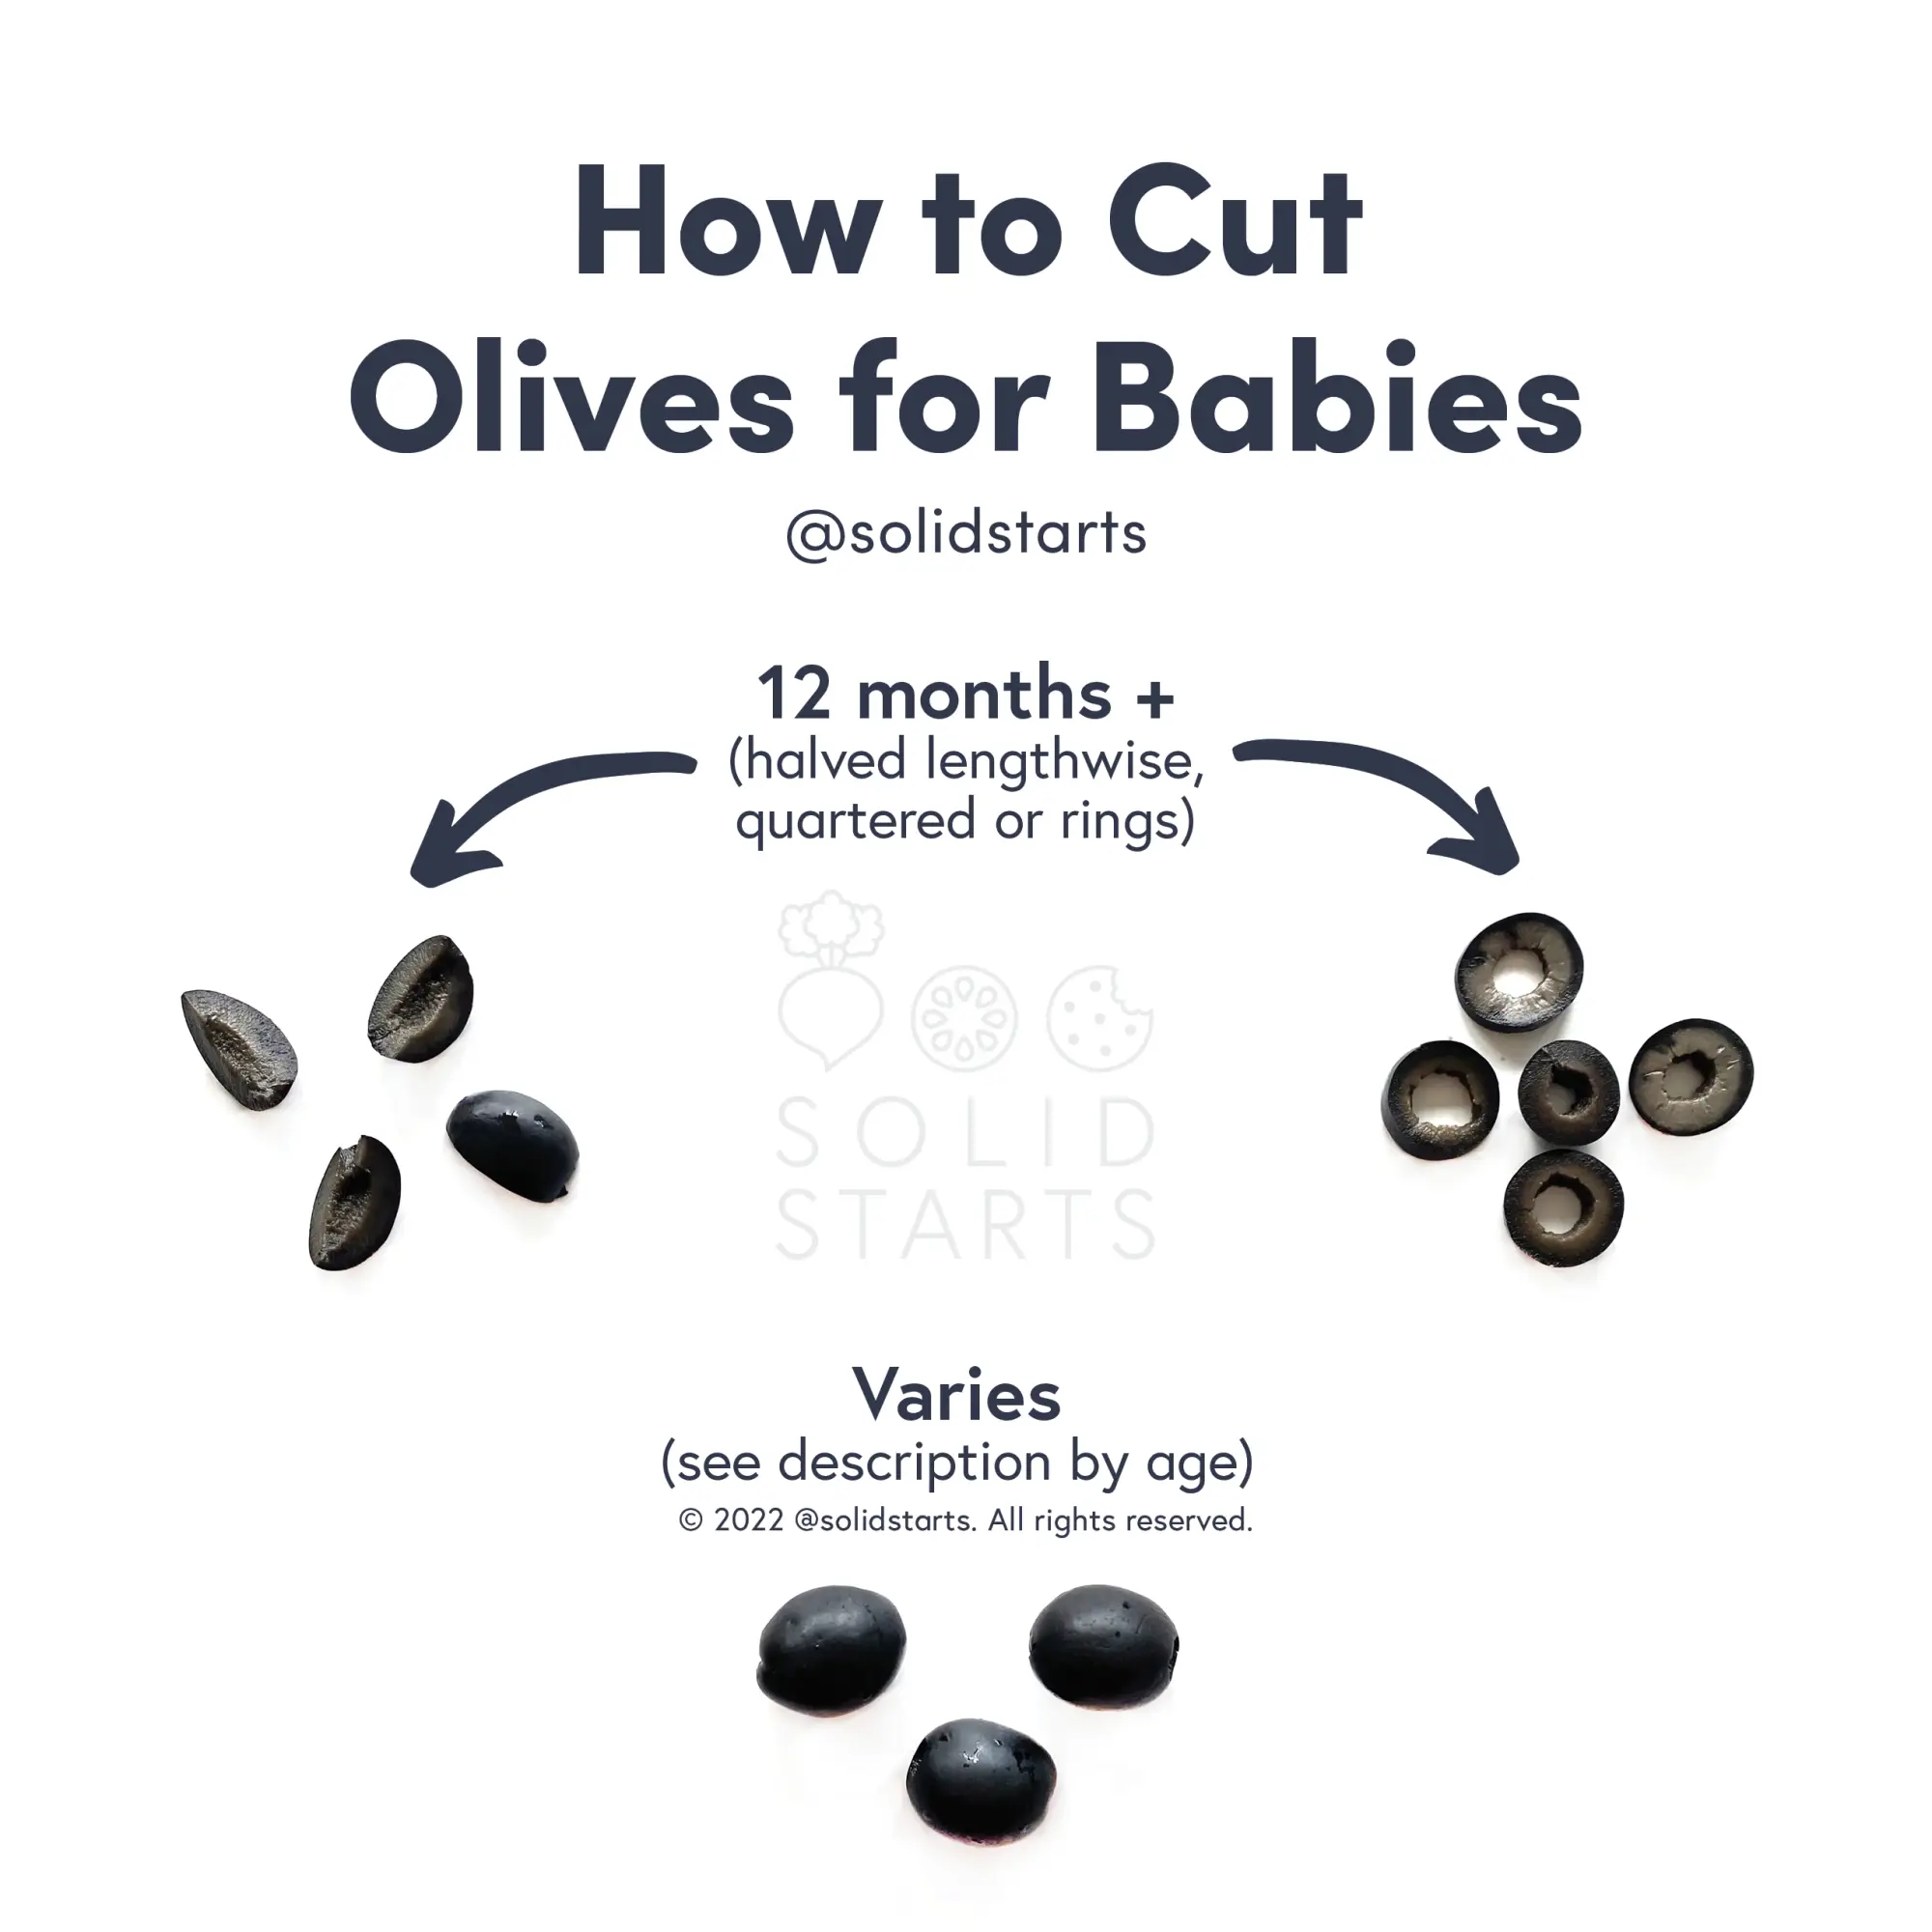 When Can Babies Have Olives? Olives for Baby - Solid Starts